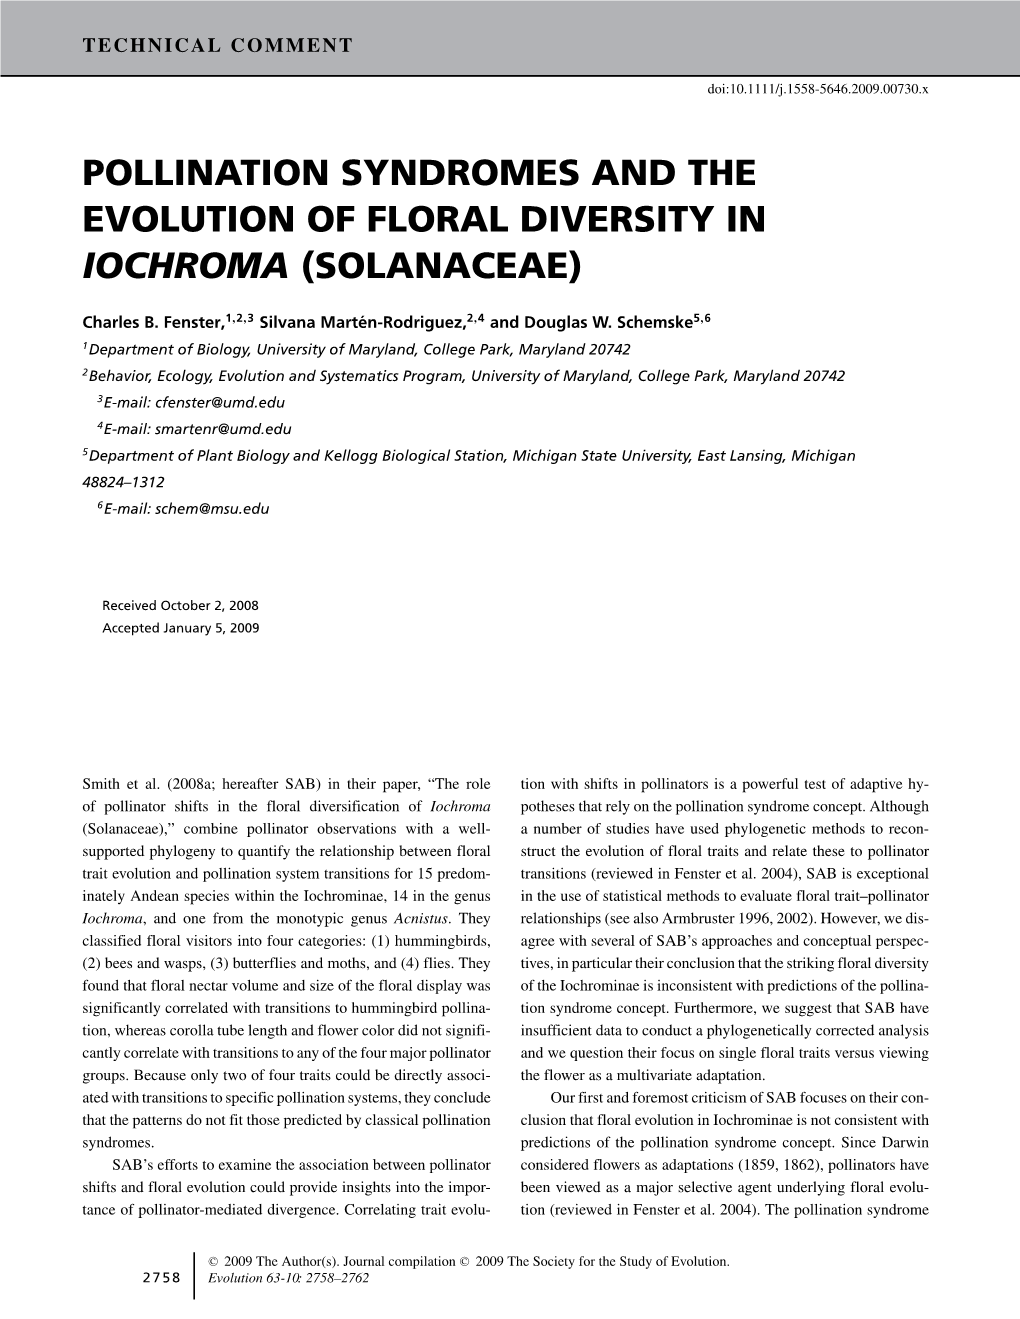 Pollination Syndromes and the Evolution of Floral Diversity in Iochroma (Solanaceae)